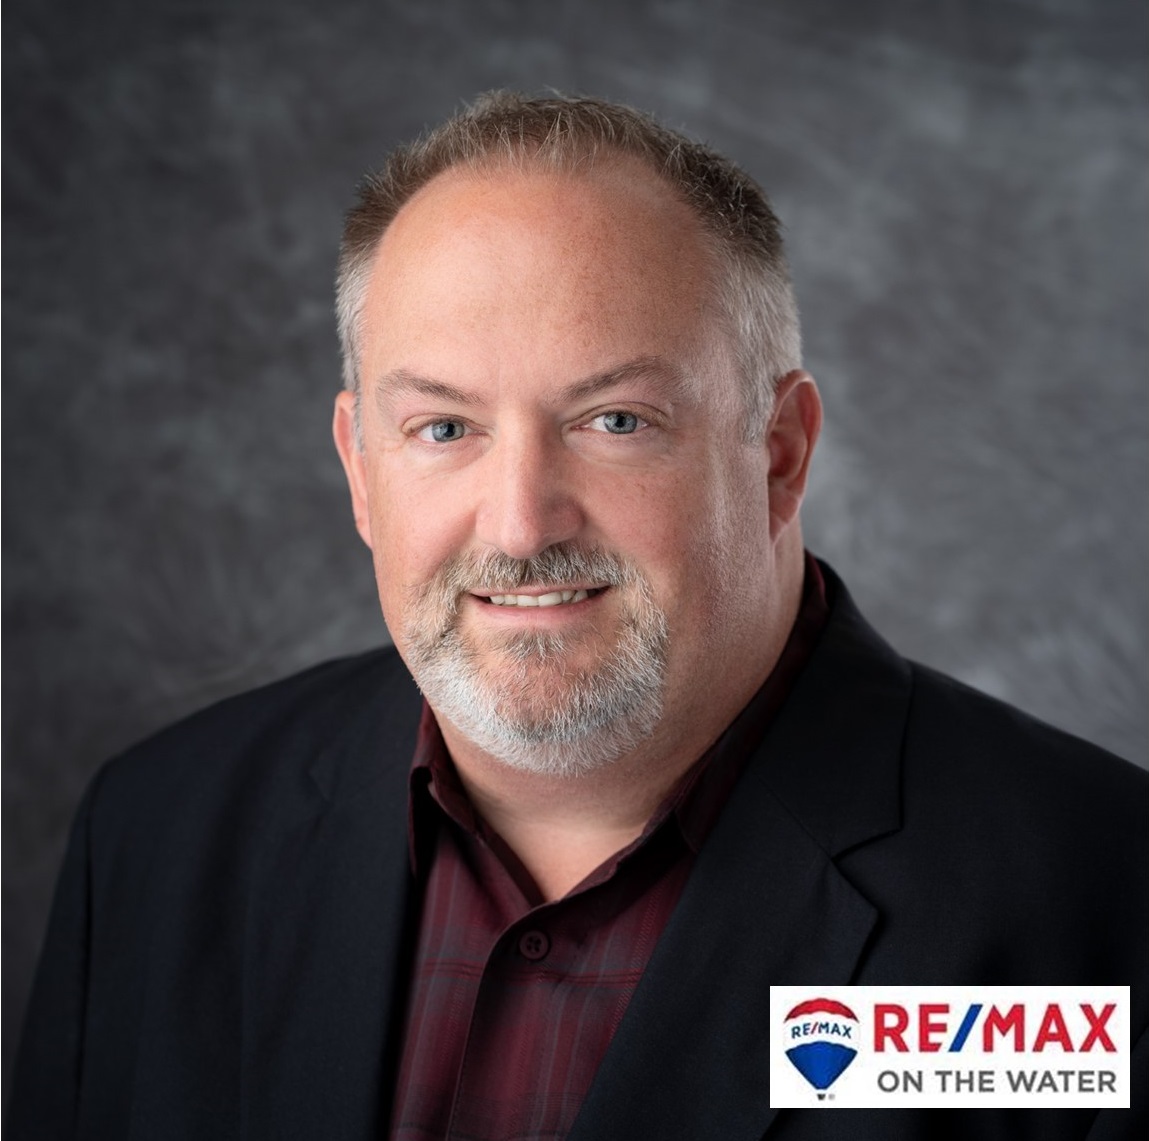 JD Williams, RE/MAX On The Water